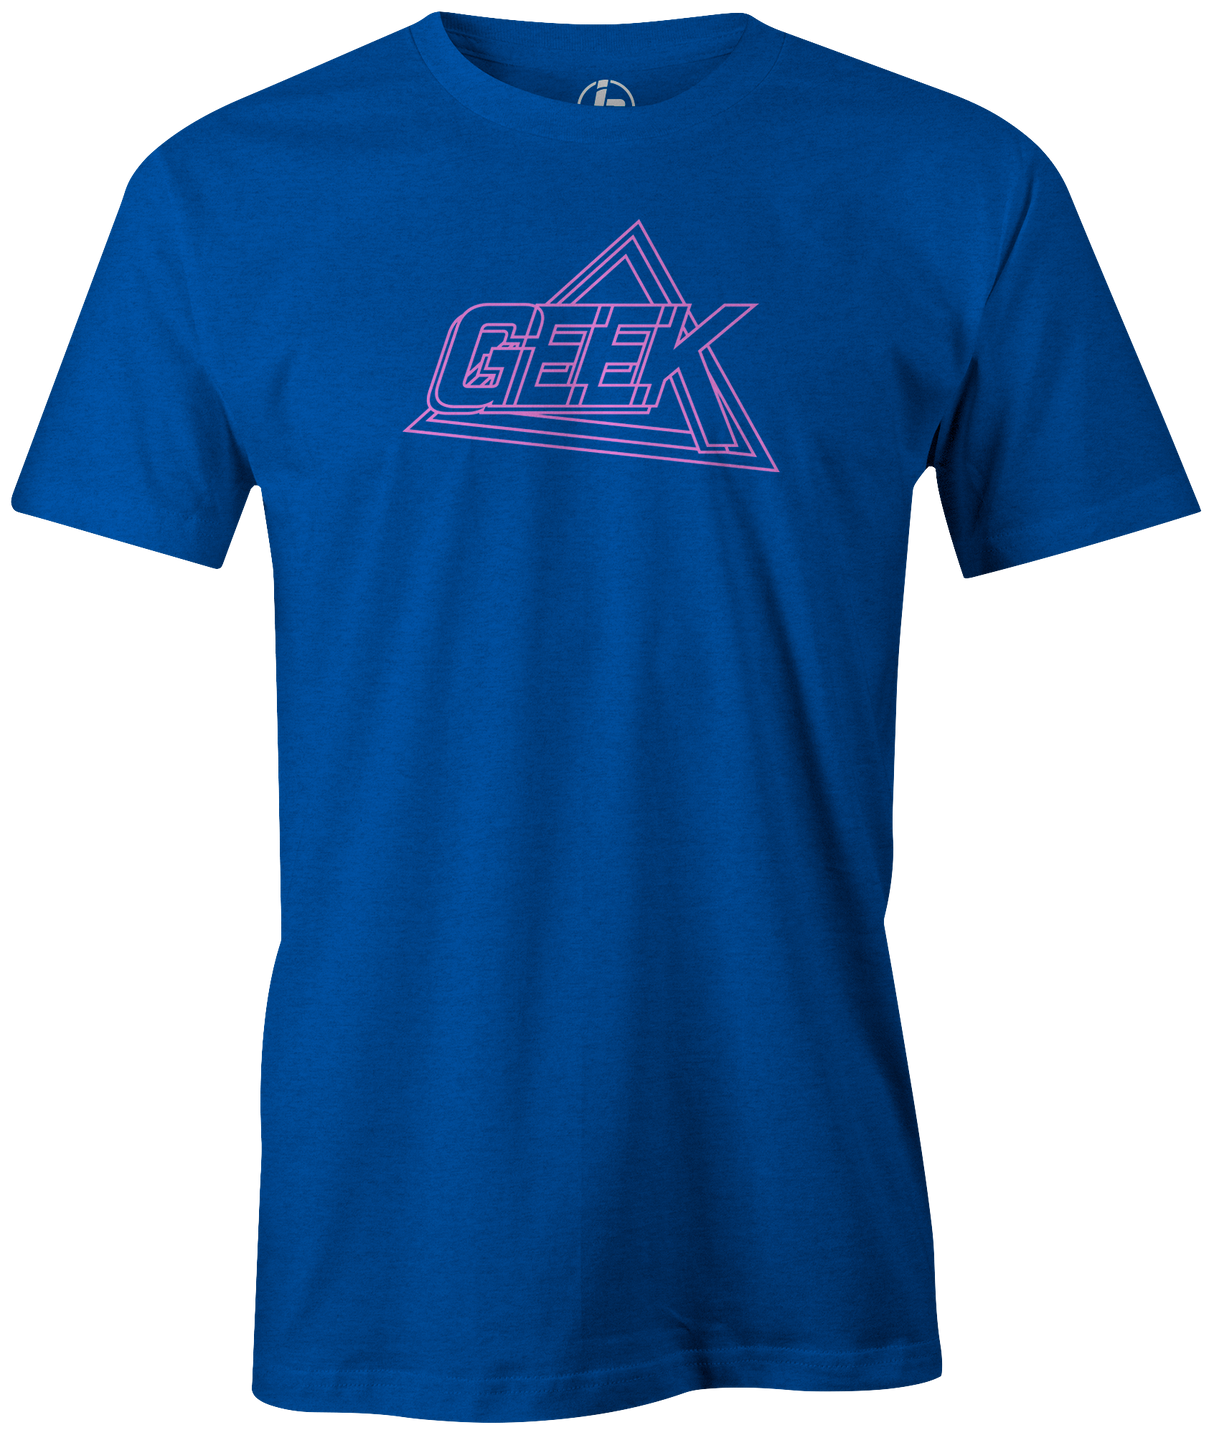 Geek by Swag Bowling. Swag Bowling Classic Logo T-shirt. This shirt is perfect for bowling practice, leagues or weekend tournaments. Men's T-Shirt, bowling ball, tee, tee shirt, tee-shirt, t shirt, t-shirt, tees, league, tournament shirt, PBA, PWBA, USBC. 